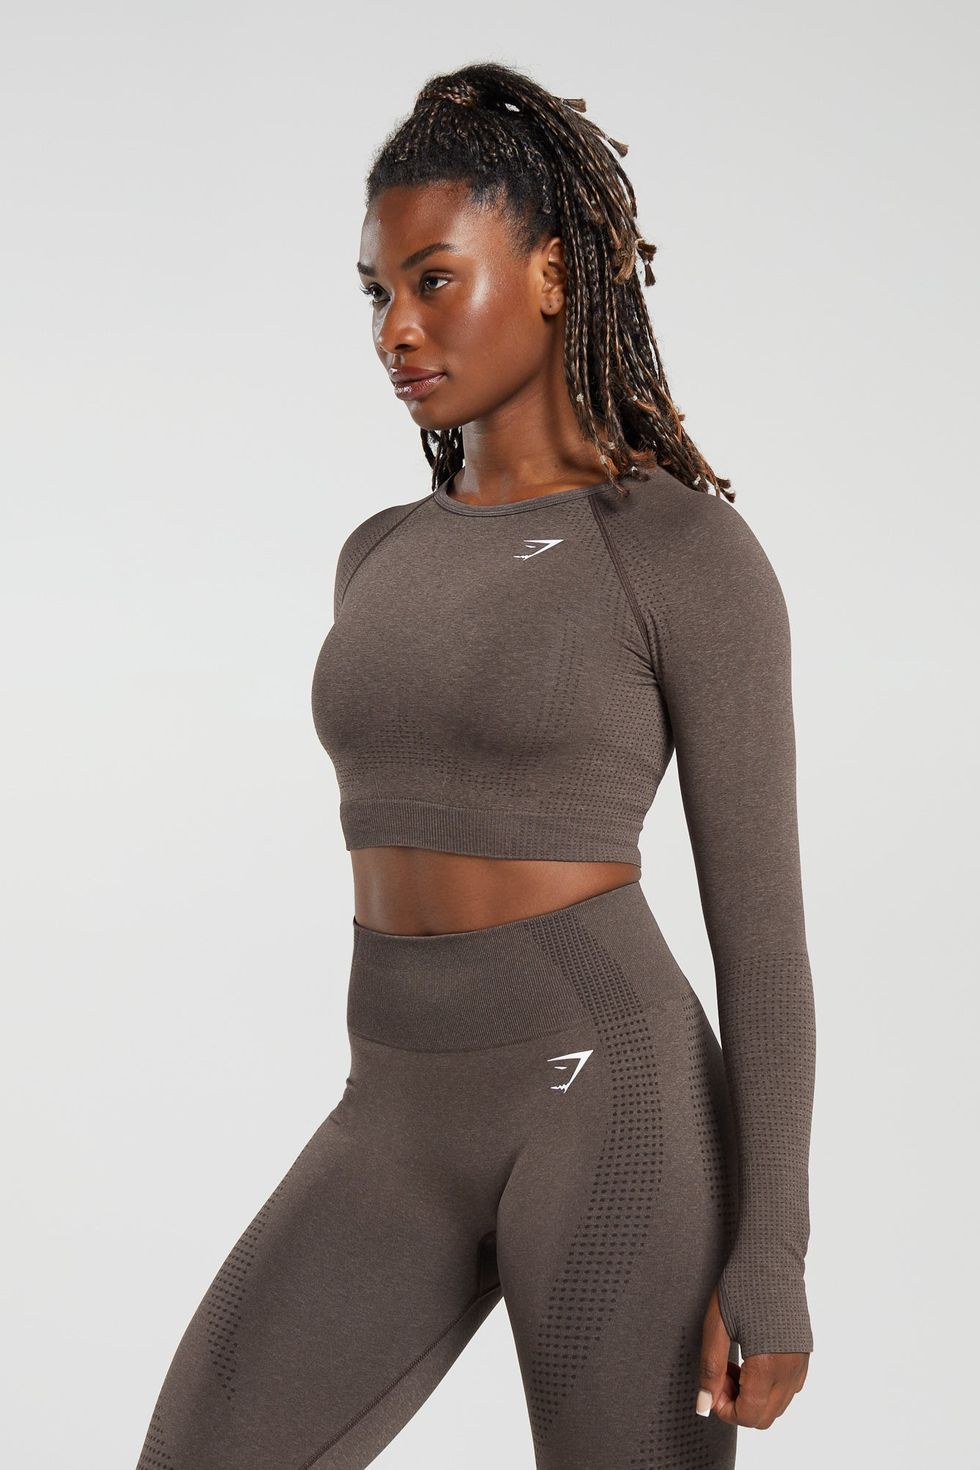 Breathable Seamless Leggings and Short Sleeve Crop Top